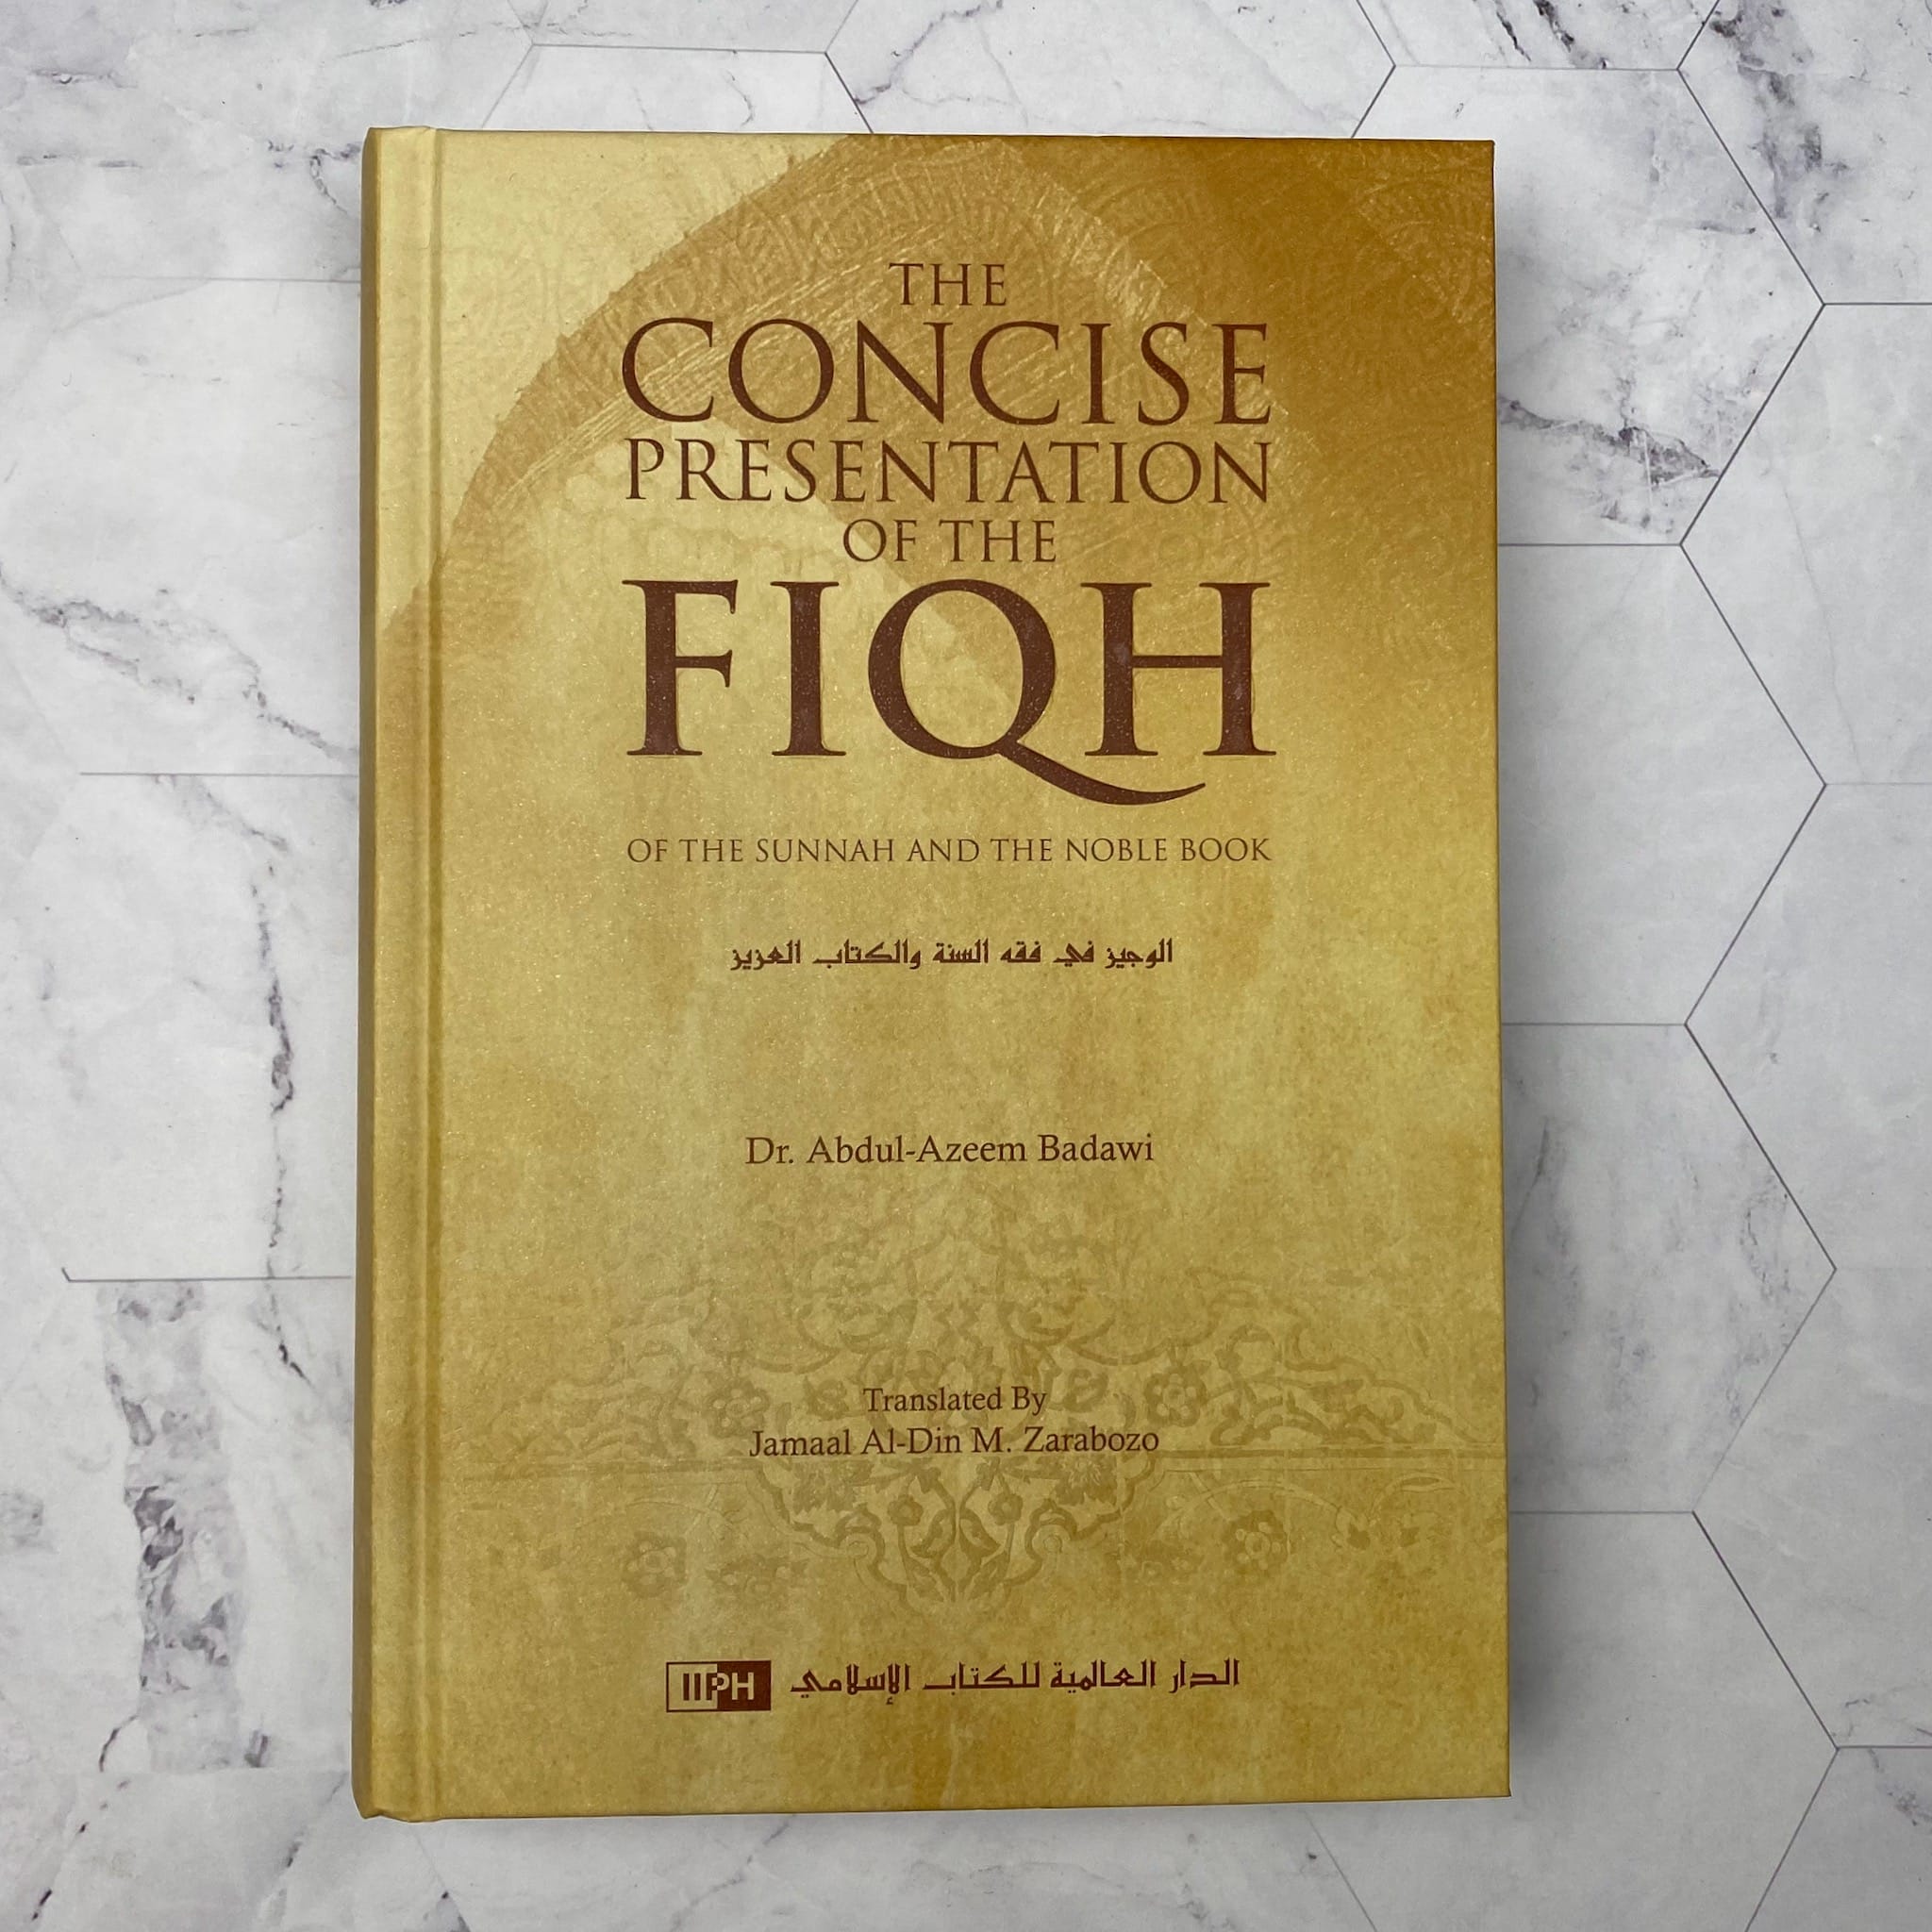 The Concise Presentation of the Fiqh of the Sunnah and the Noble Book IIPH Australia